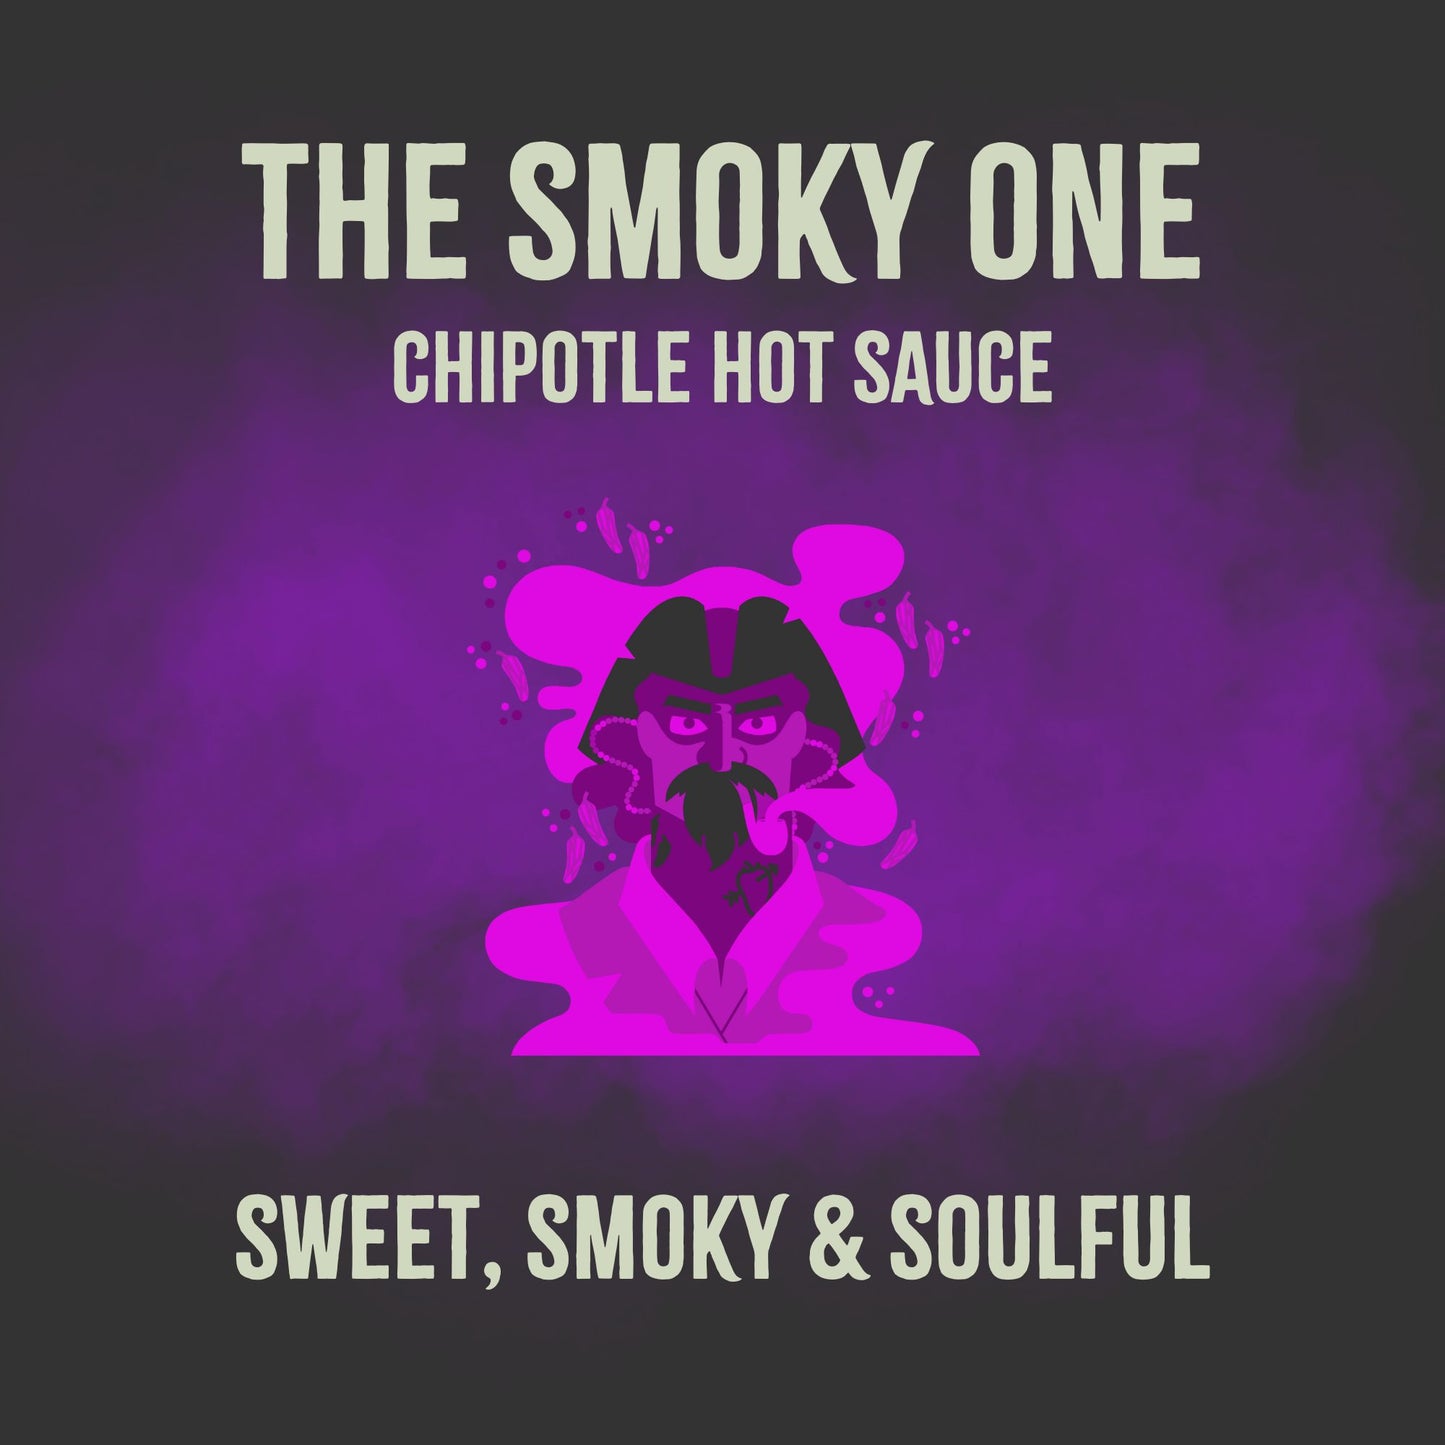 The Smoky One | Chipotle Hot Sauce